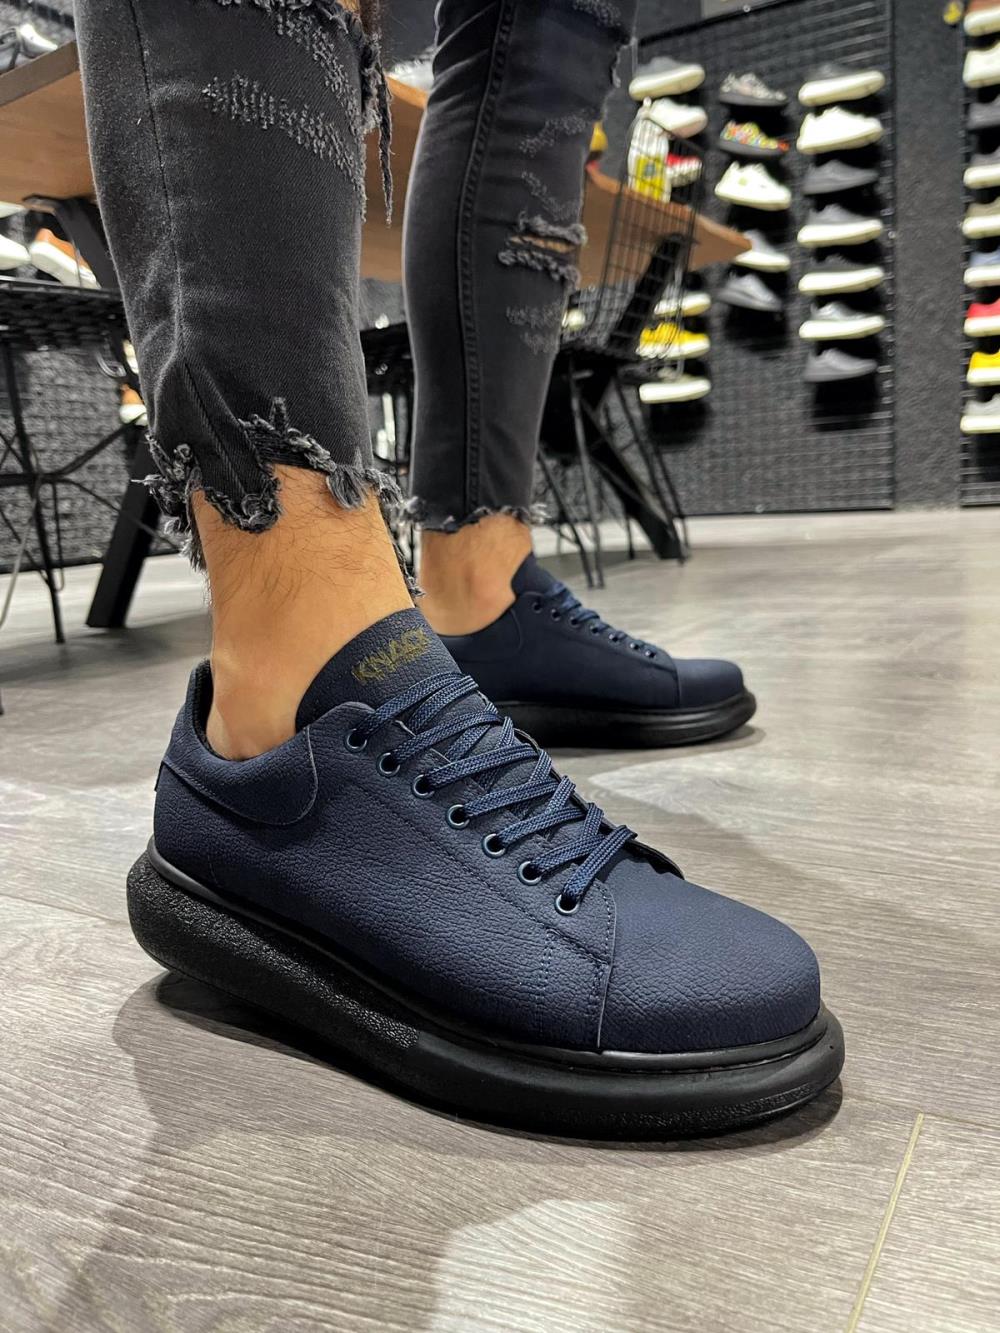 Knack High Sole Casual Shoes 045 Navy Blue (Black Sole) - STREETMODE™